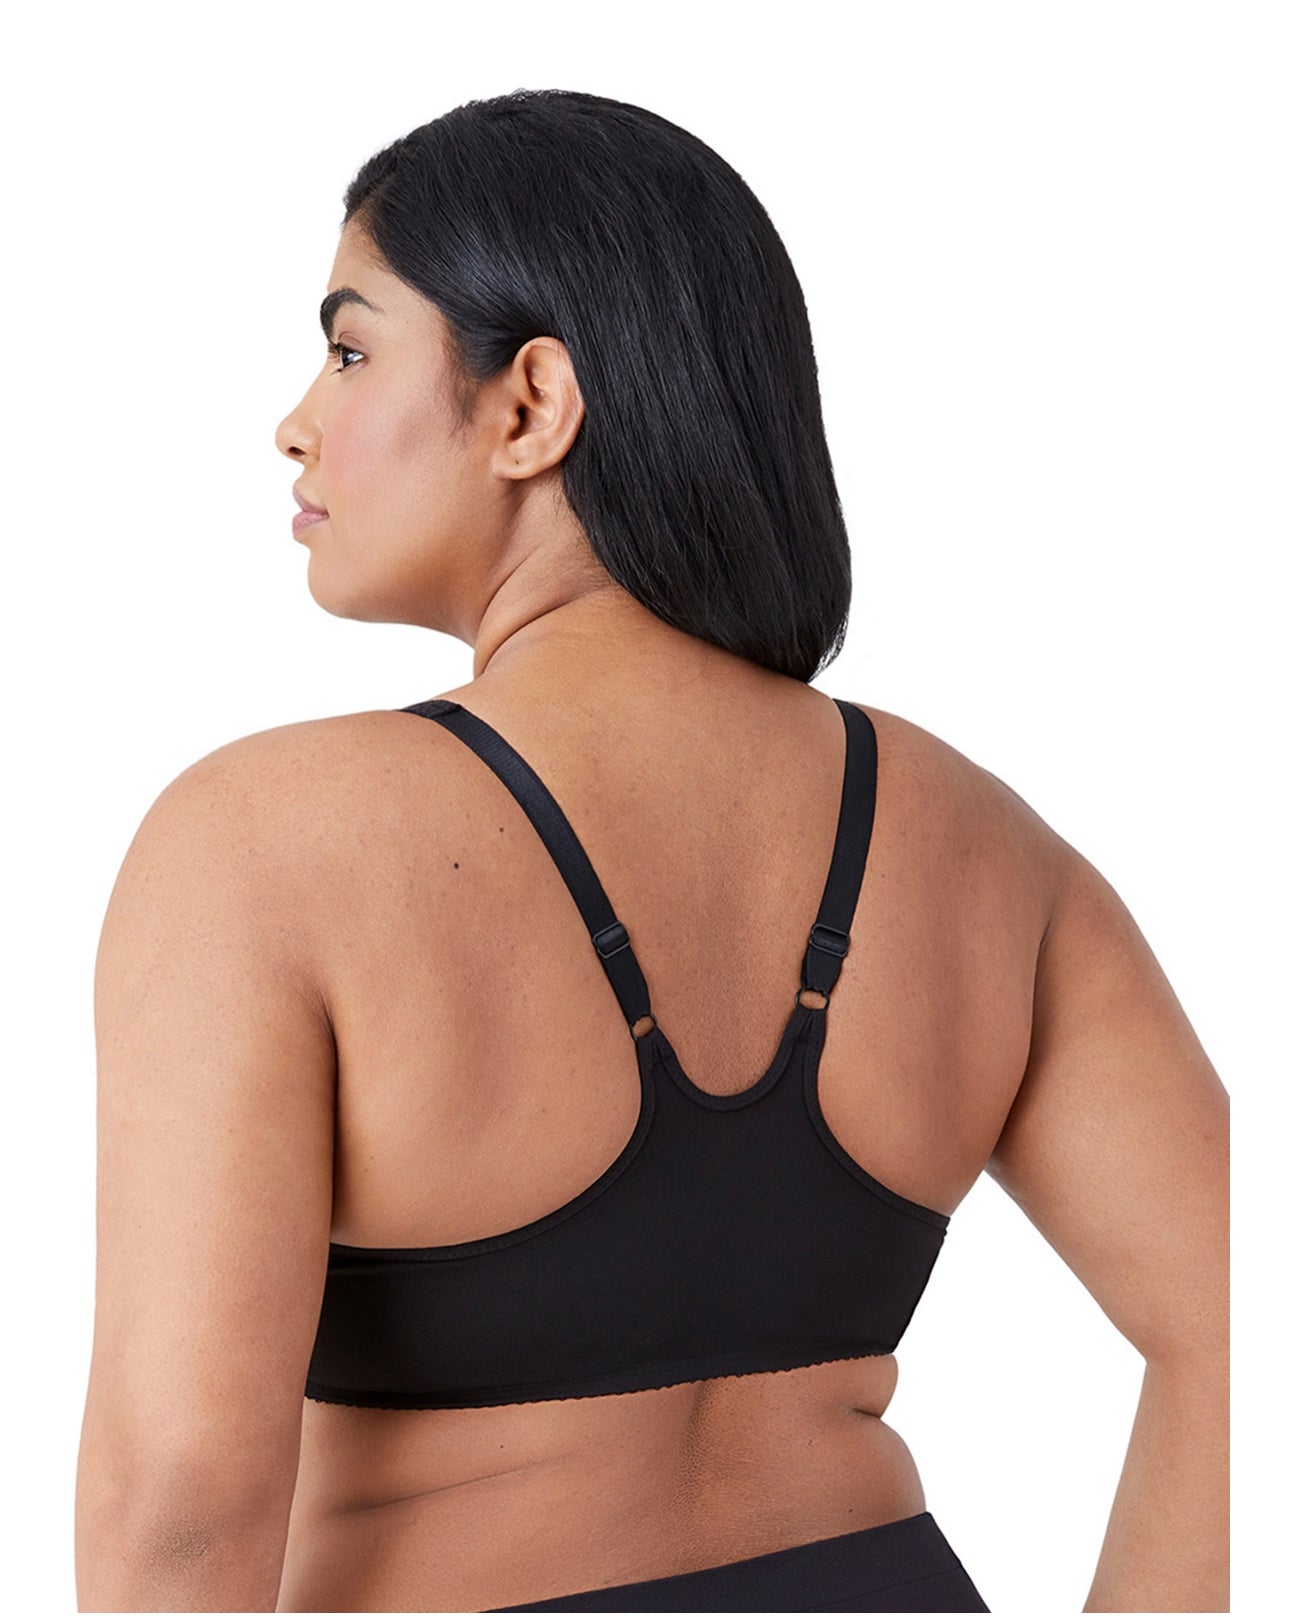 Body by Wacoal Racerback Underwire Bra - An Intimate Affaire